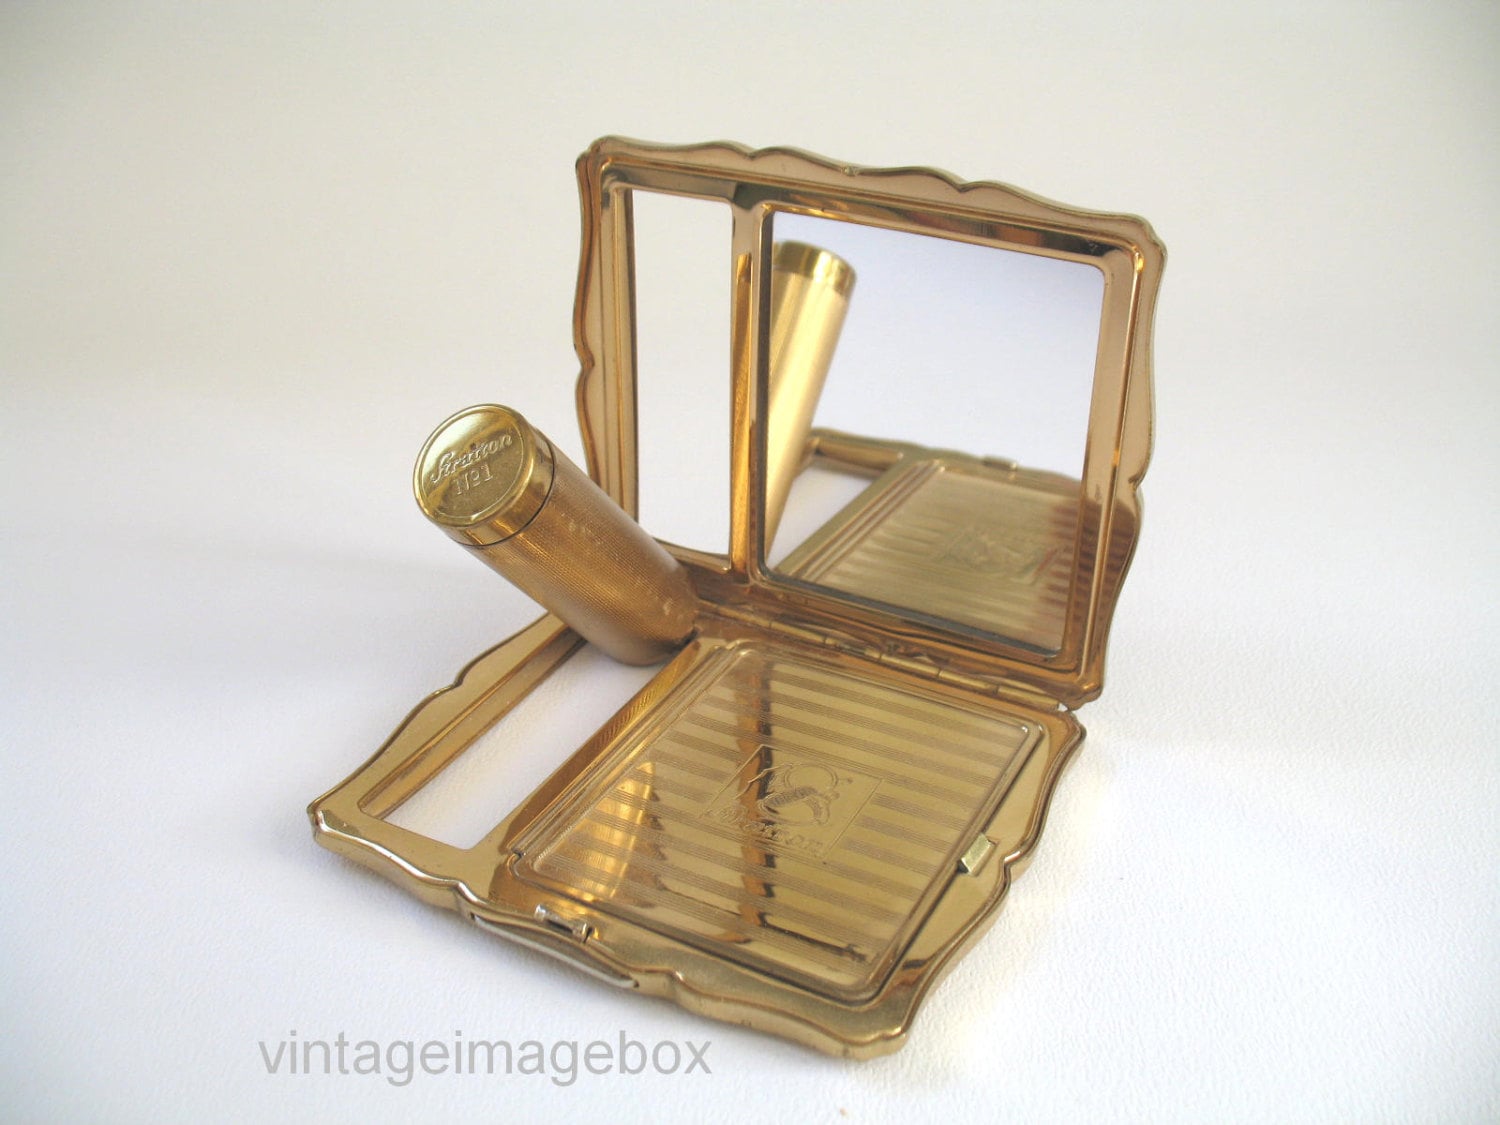 1950s-1960s Powder Compact | 14 Vintage Beauty Etsy Finds You Didn't Know Existed | POPSUGAR Beauty 8